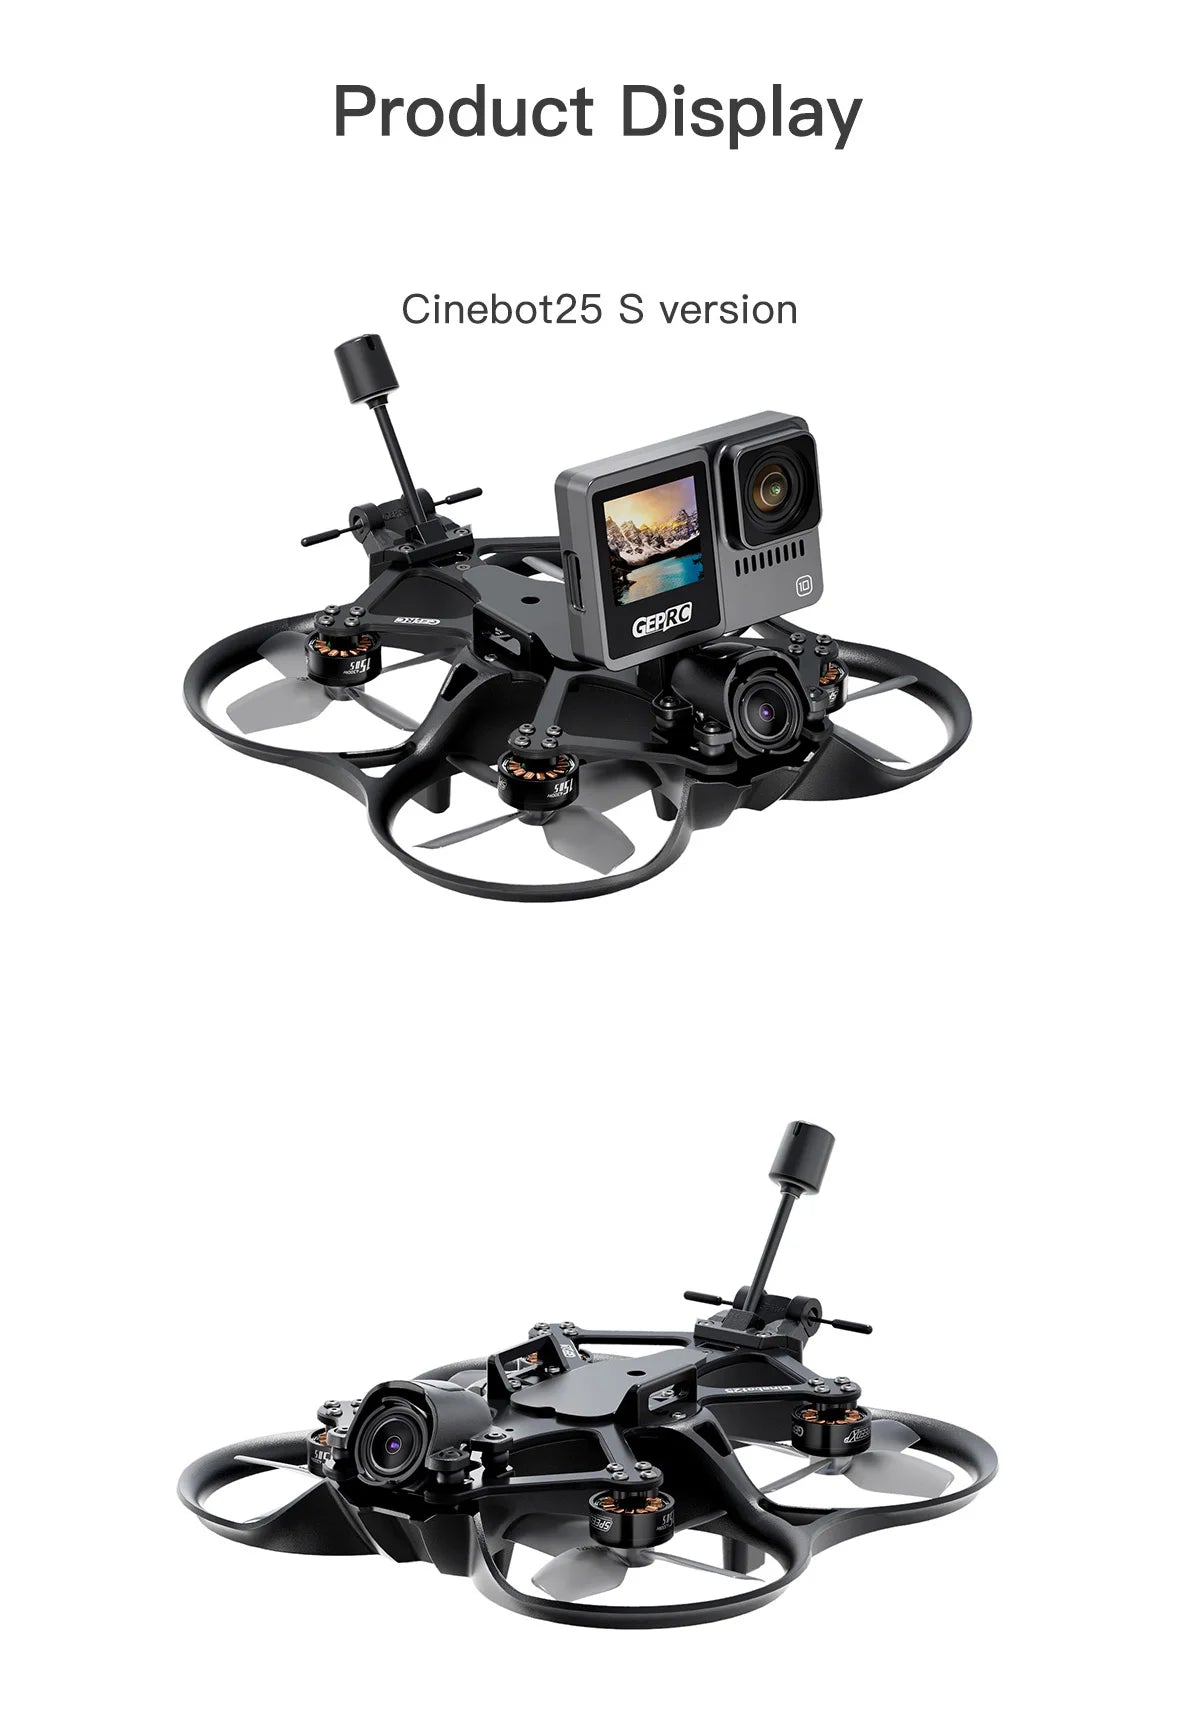 GEPRC Cinebot25 HD O3 FPV Drone, GEPRO Cinebot25 S version S451 